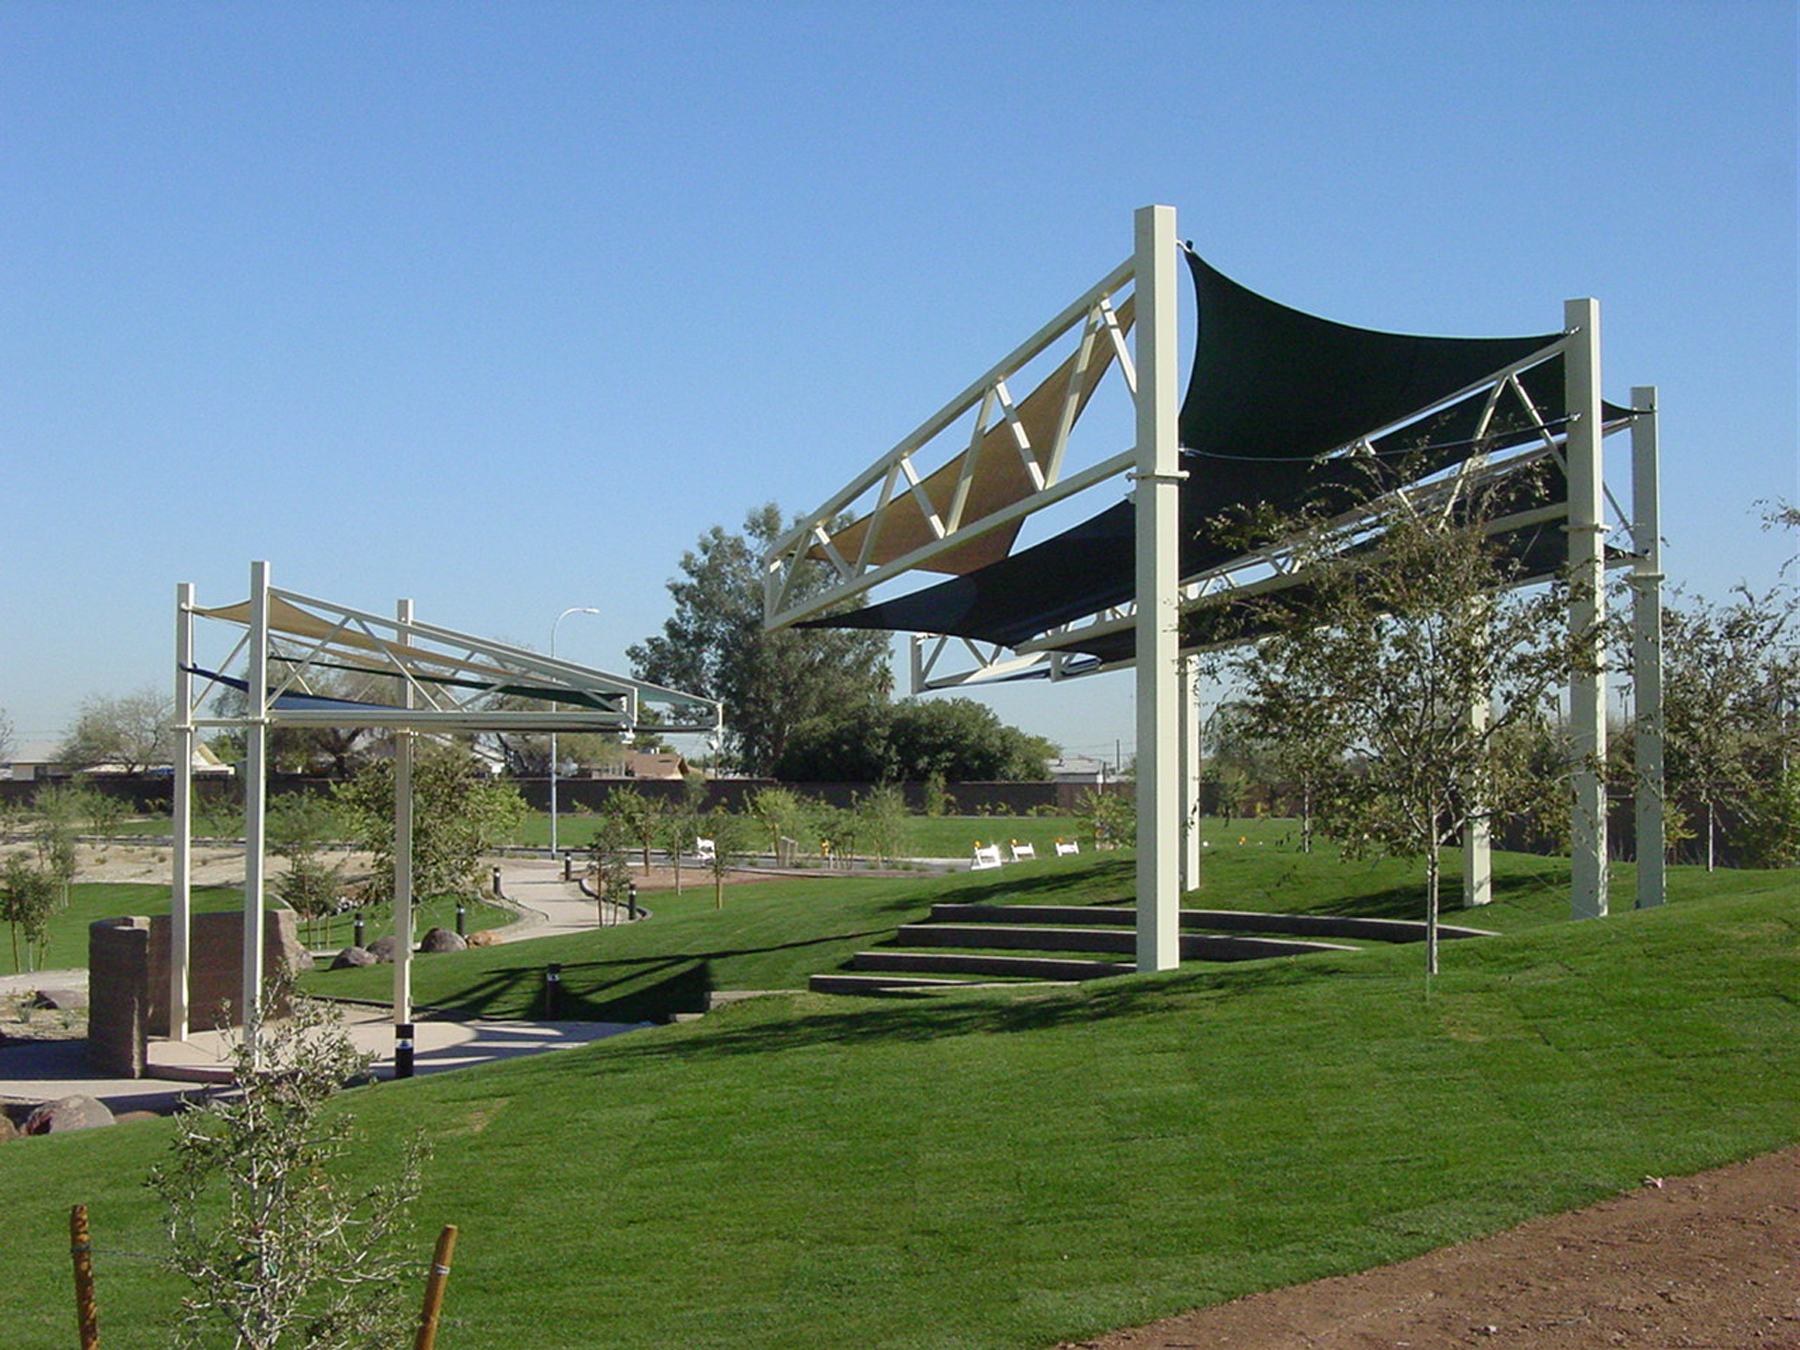 shade structure in park on sunny day